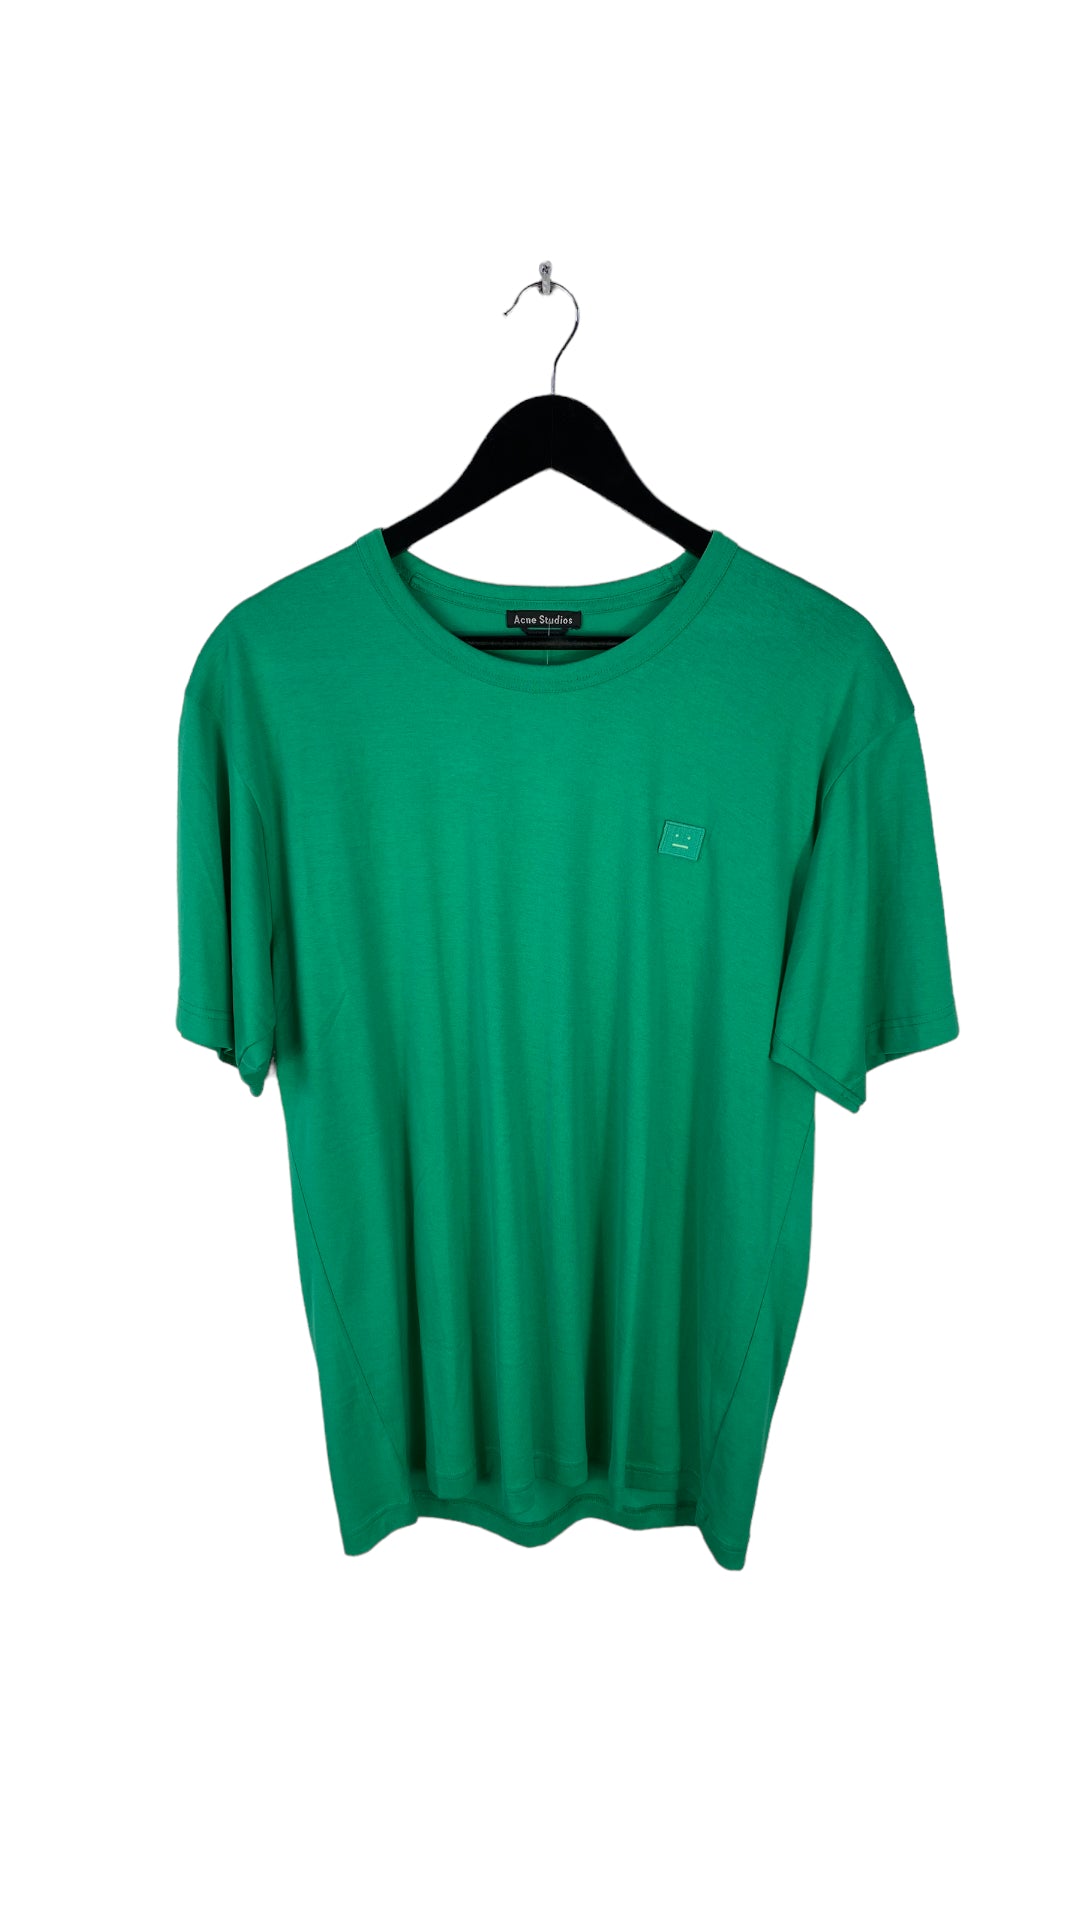 Load image into Gallery viewer, Acne Studios Green Tee Sz L
